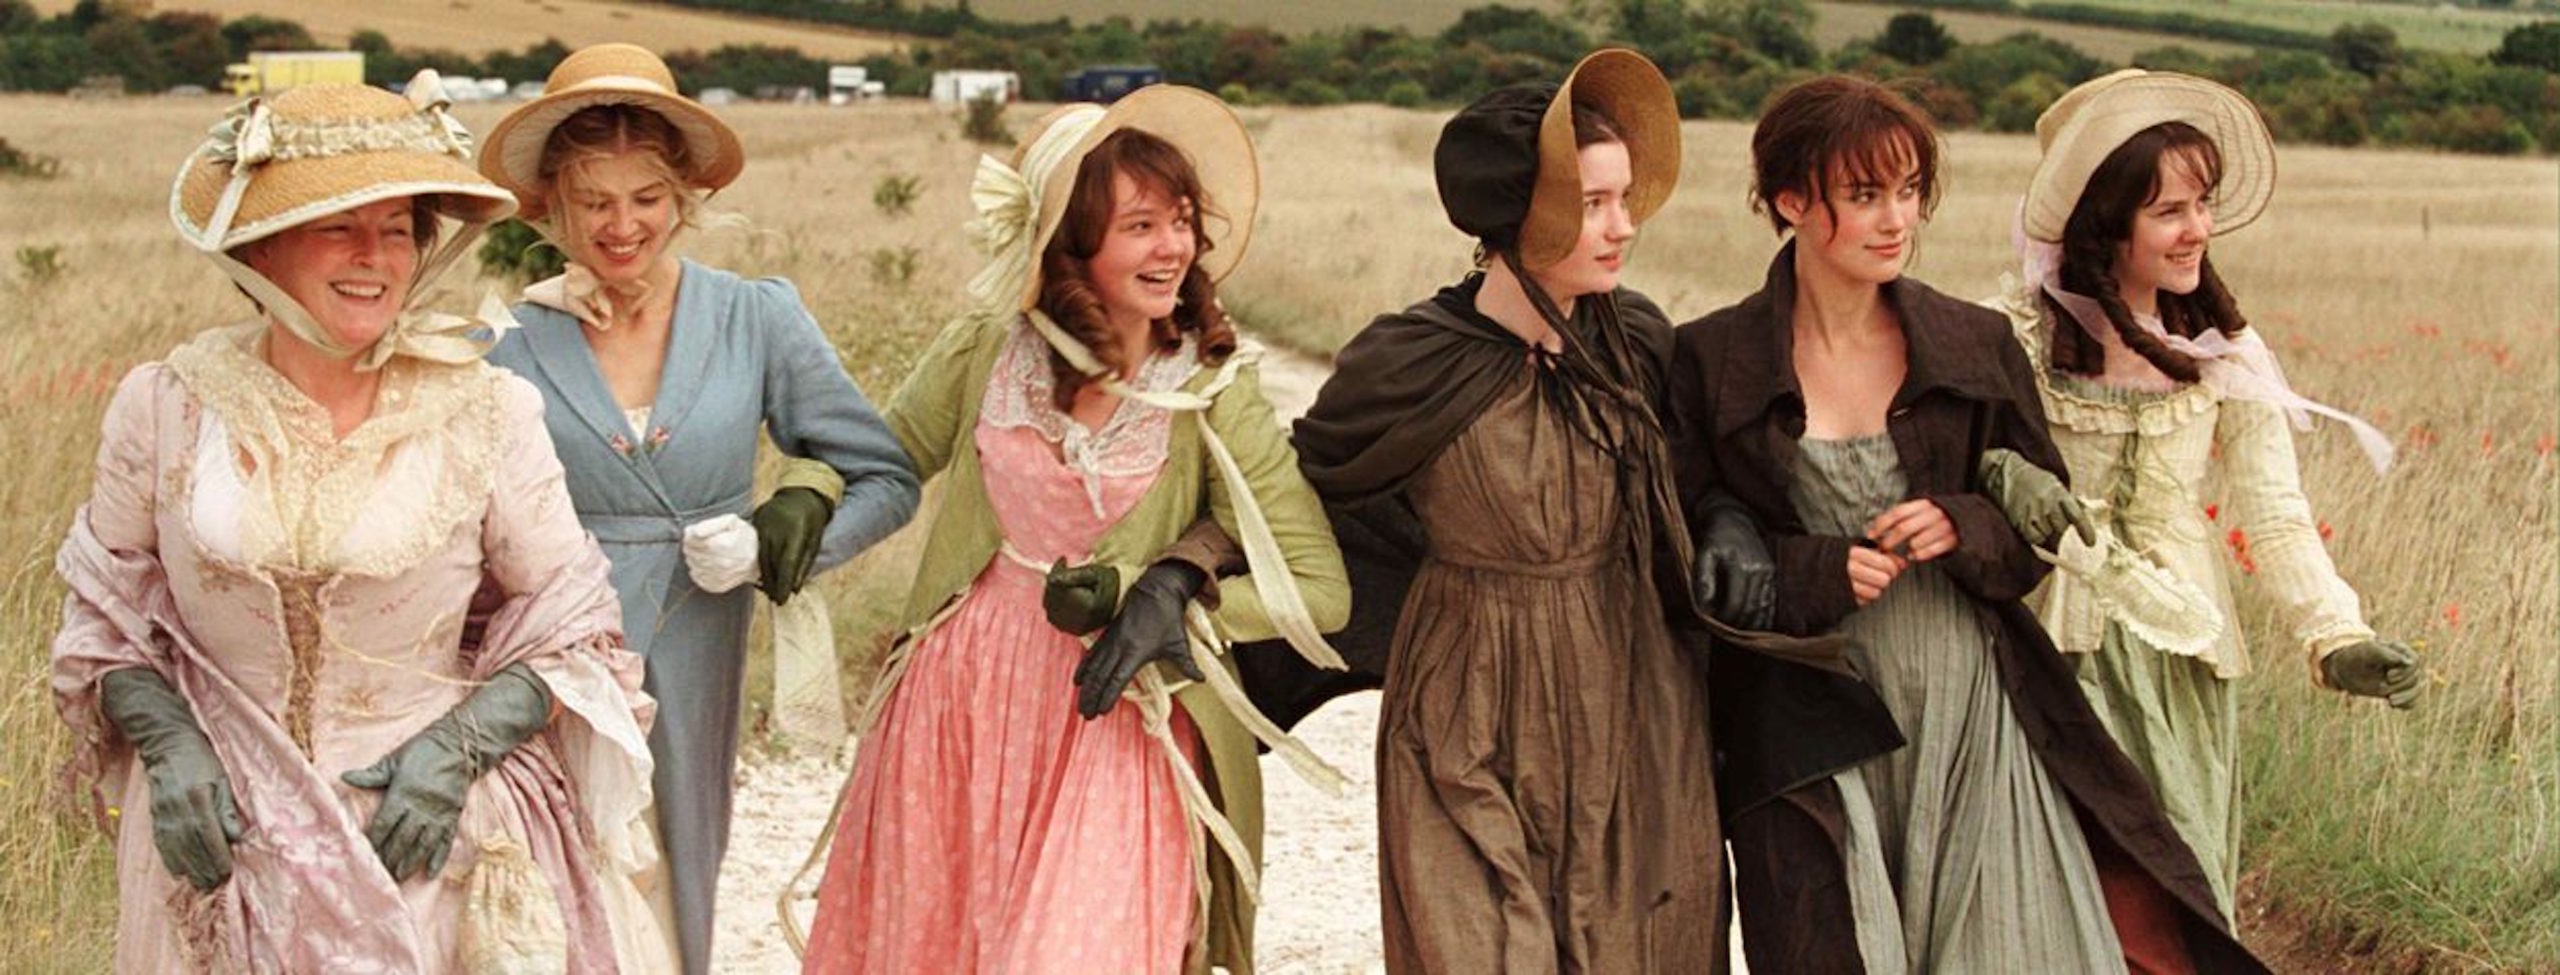 The Bennet women walking together. (left to right) Mrs. Bennet, Jane, Kitty, Mary, Elizabeth, Lydia.